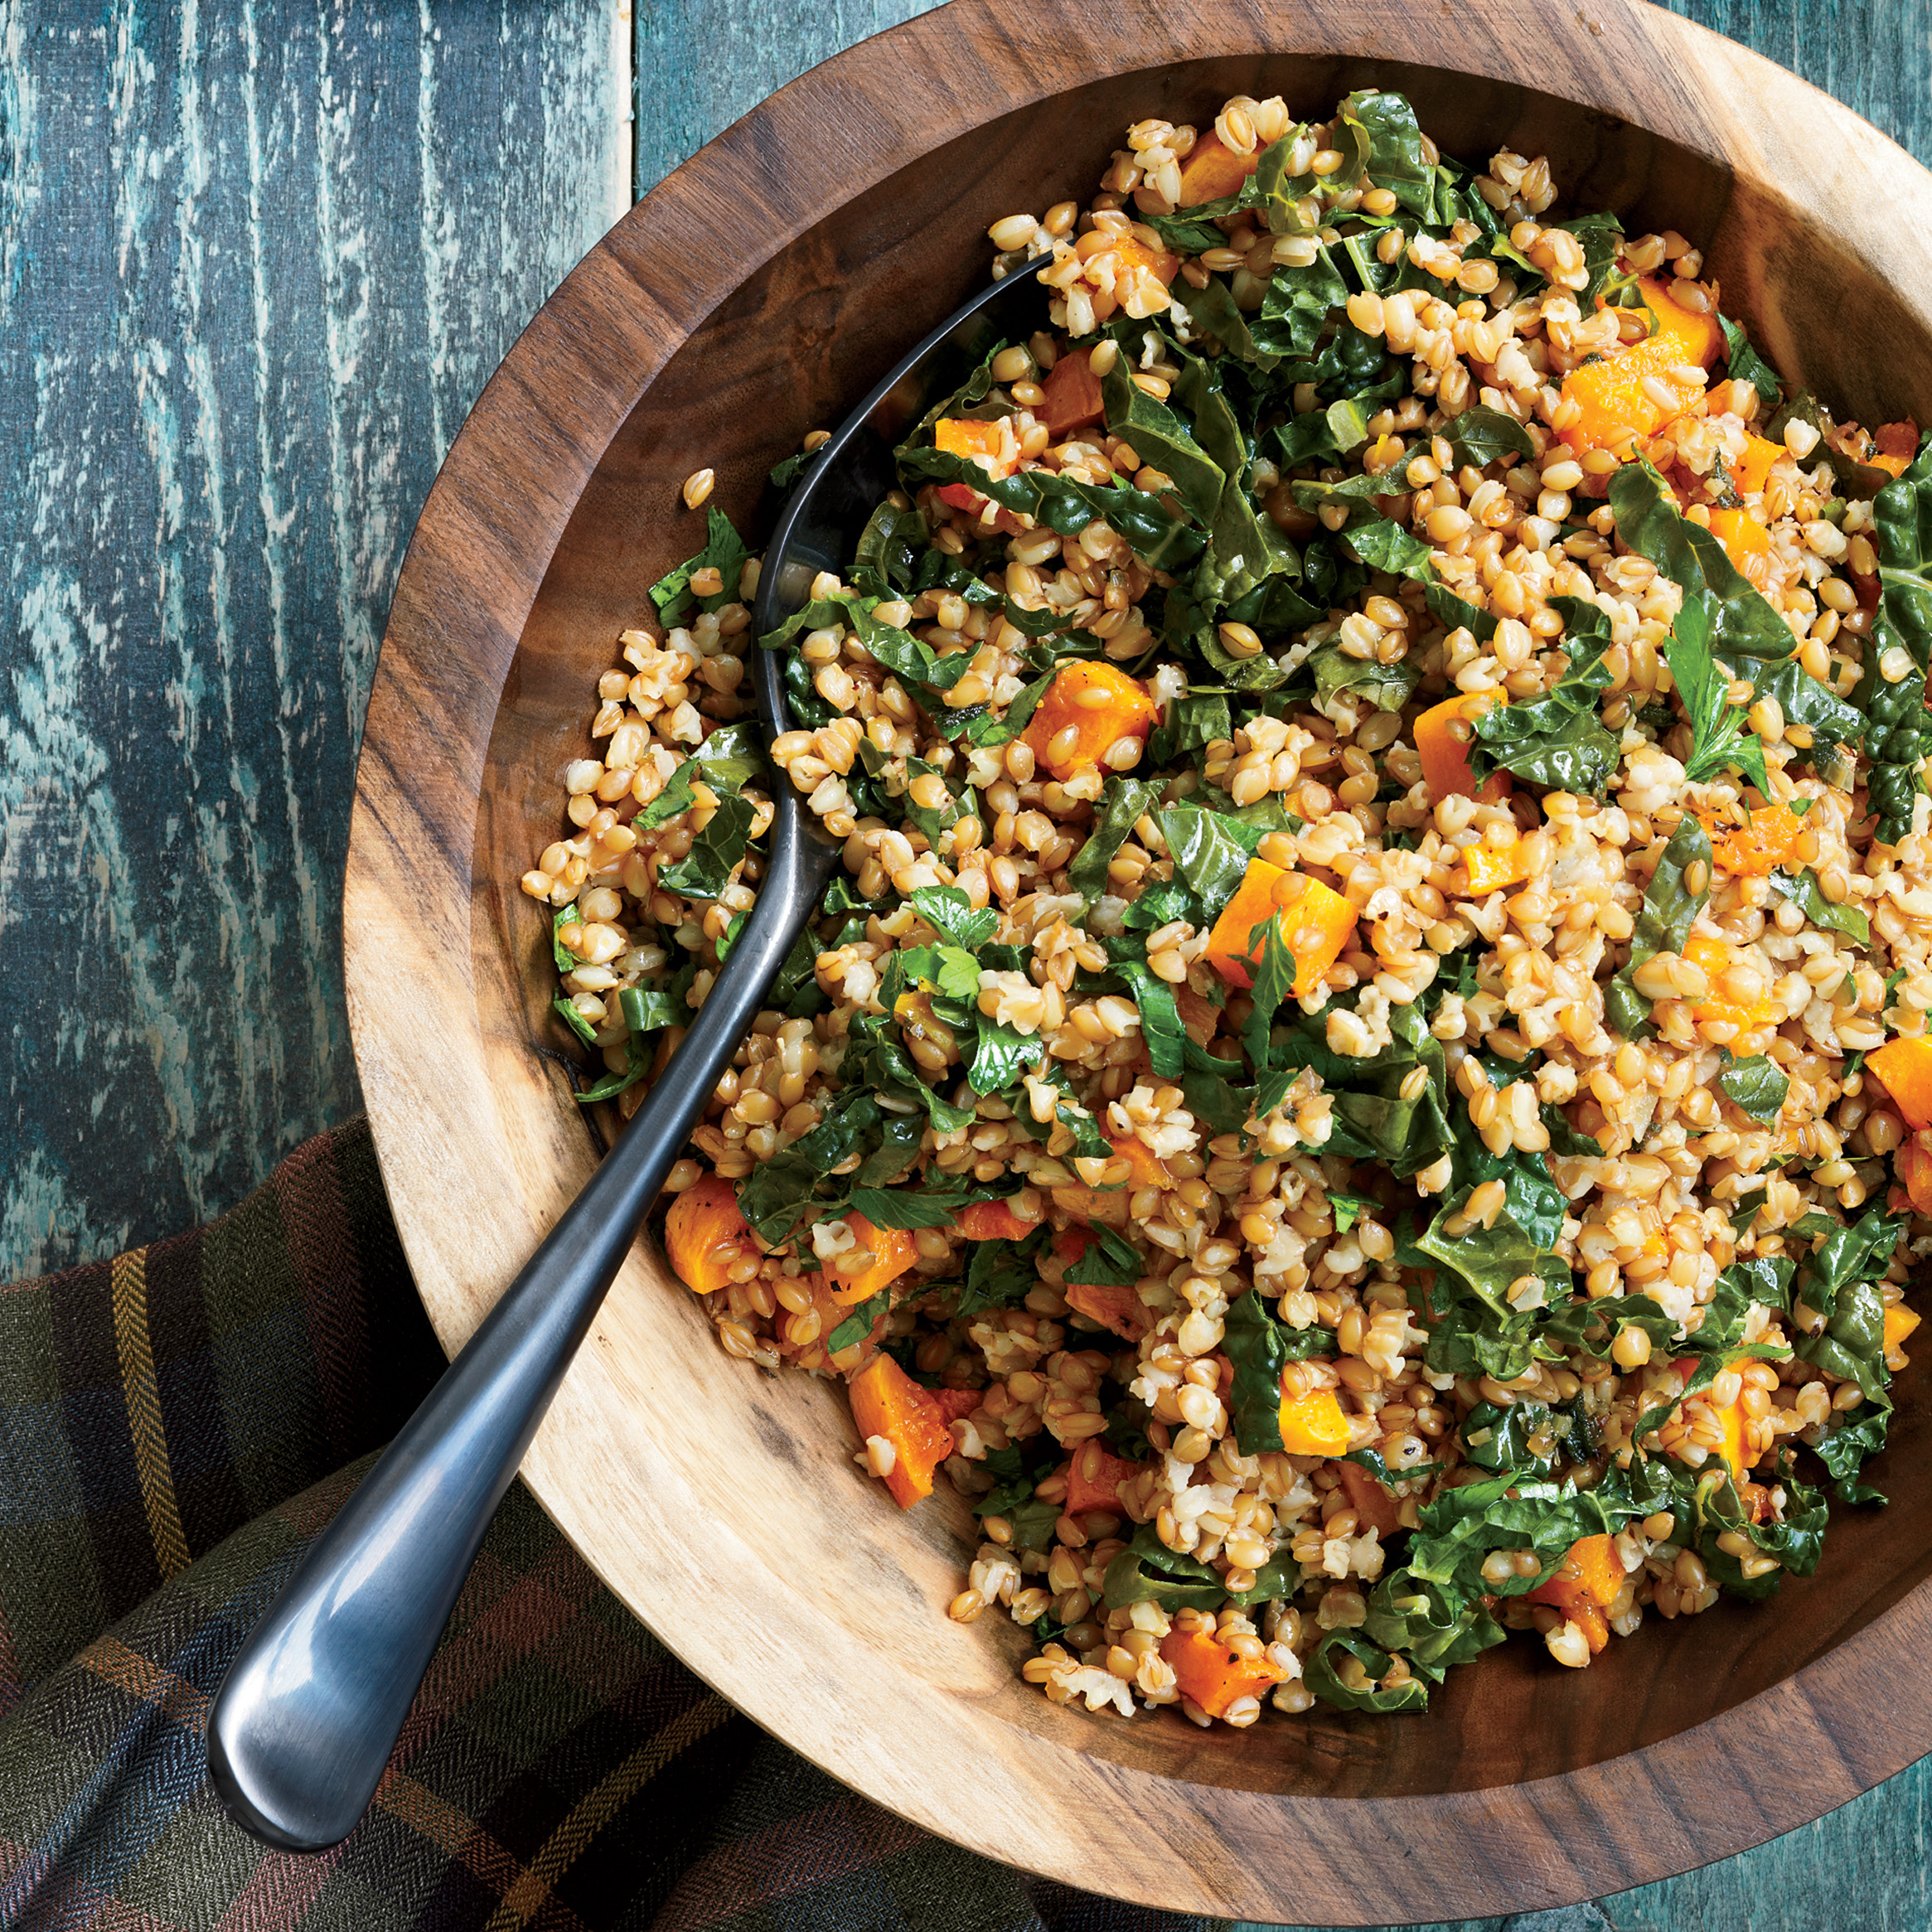 Wheat Berry Salad Recipes
 Wheat Berry Salad with Tuscan Kale and Butternut Squash